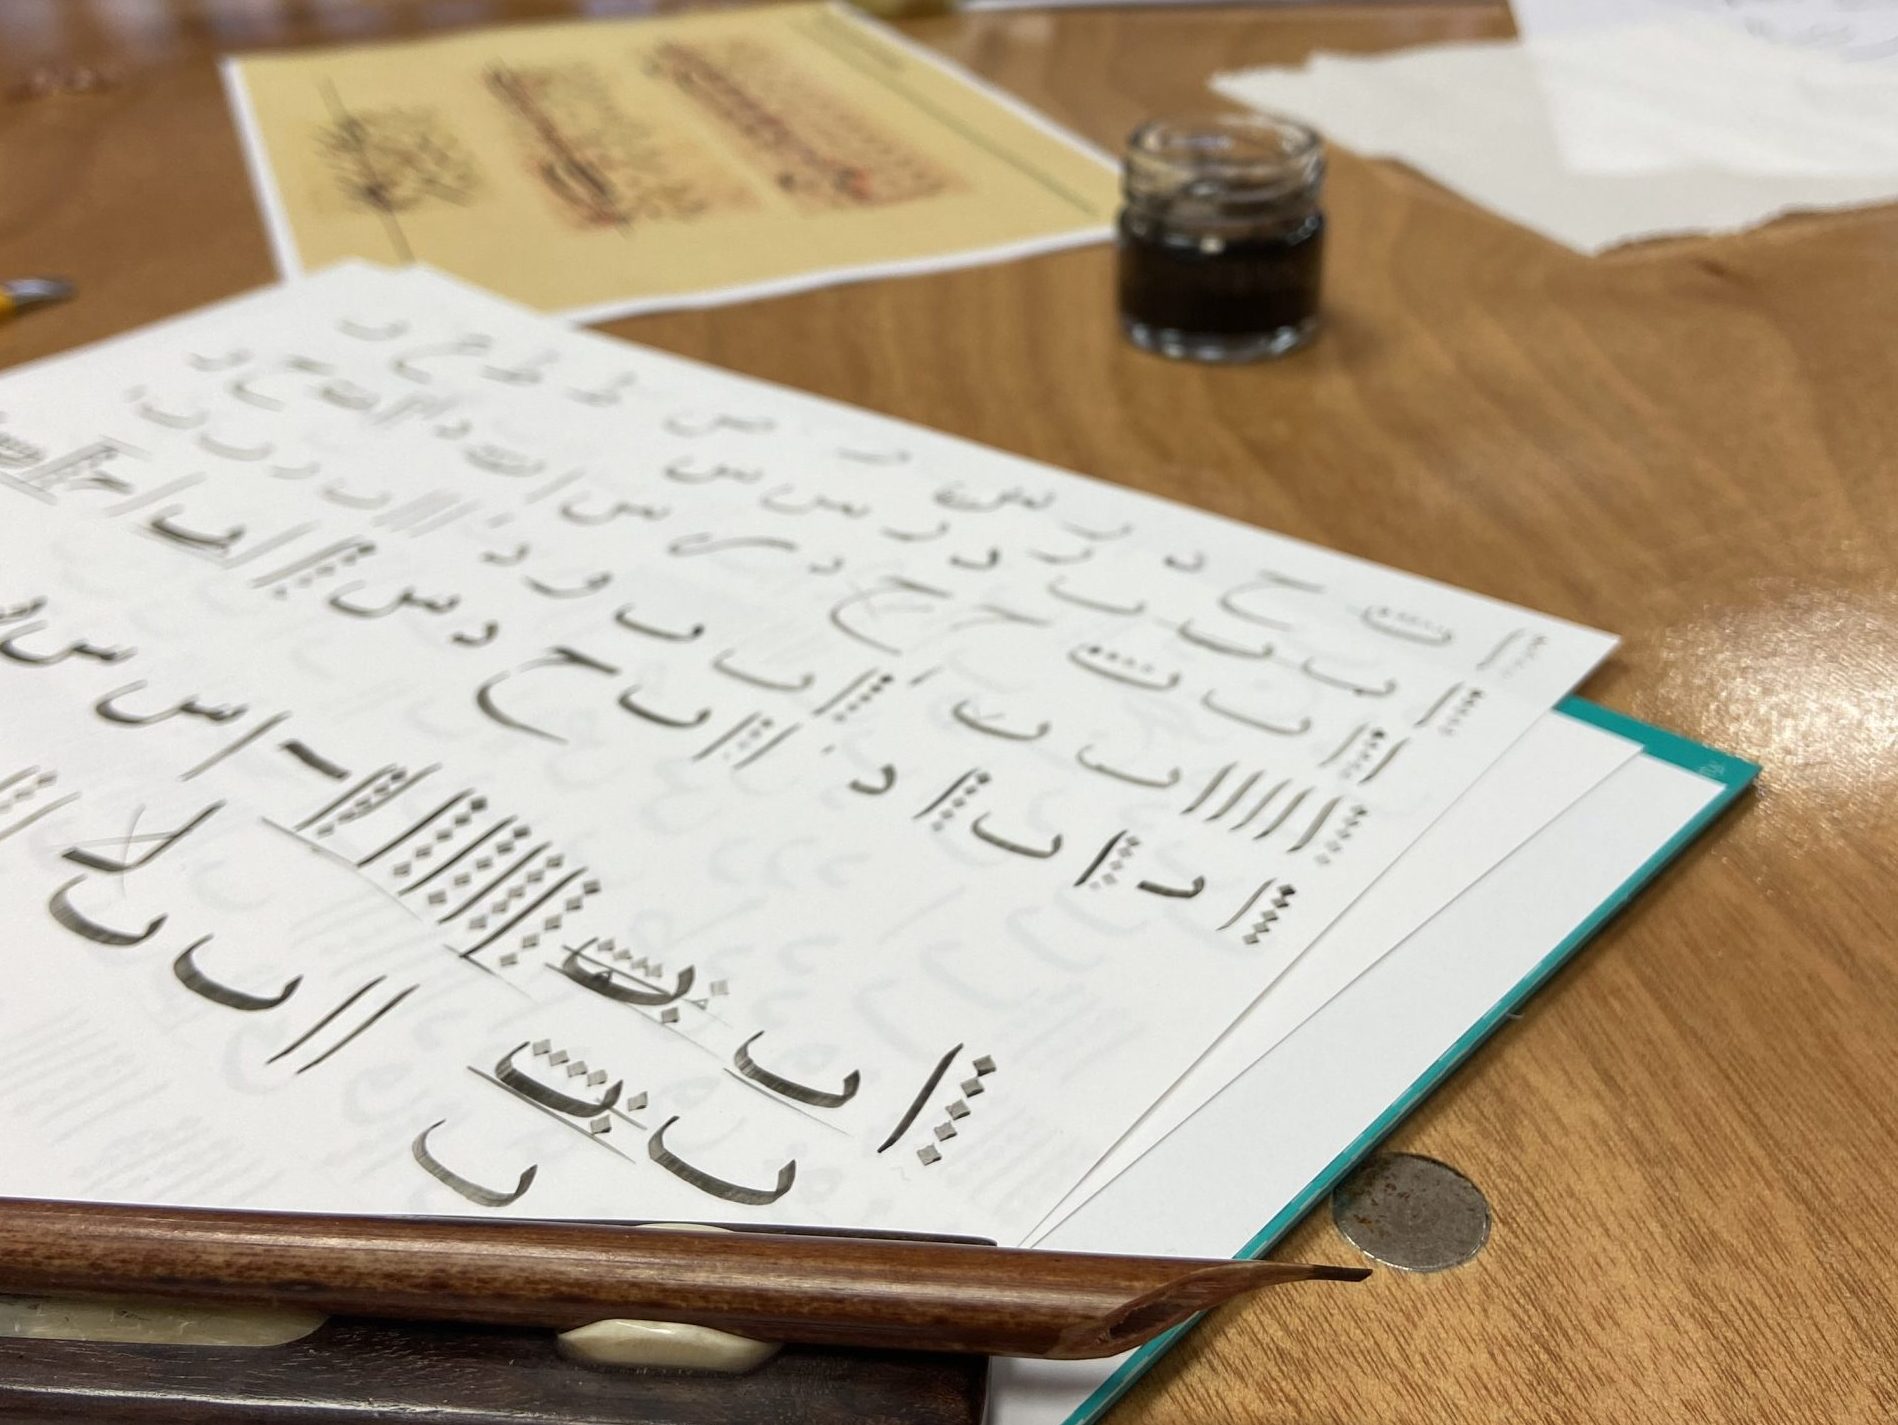 Introduction to Calligraphy (Hüsn-i Hat) Workshop with Gulnaz Mahboob